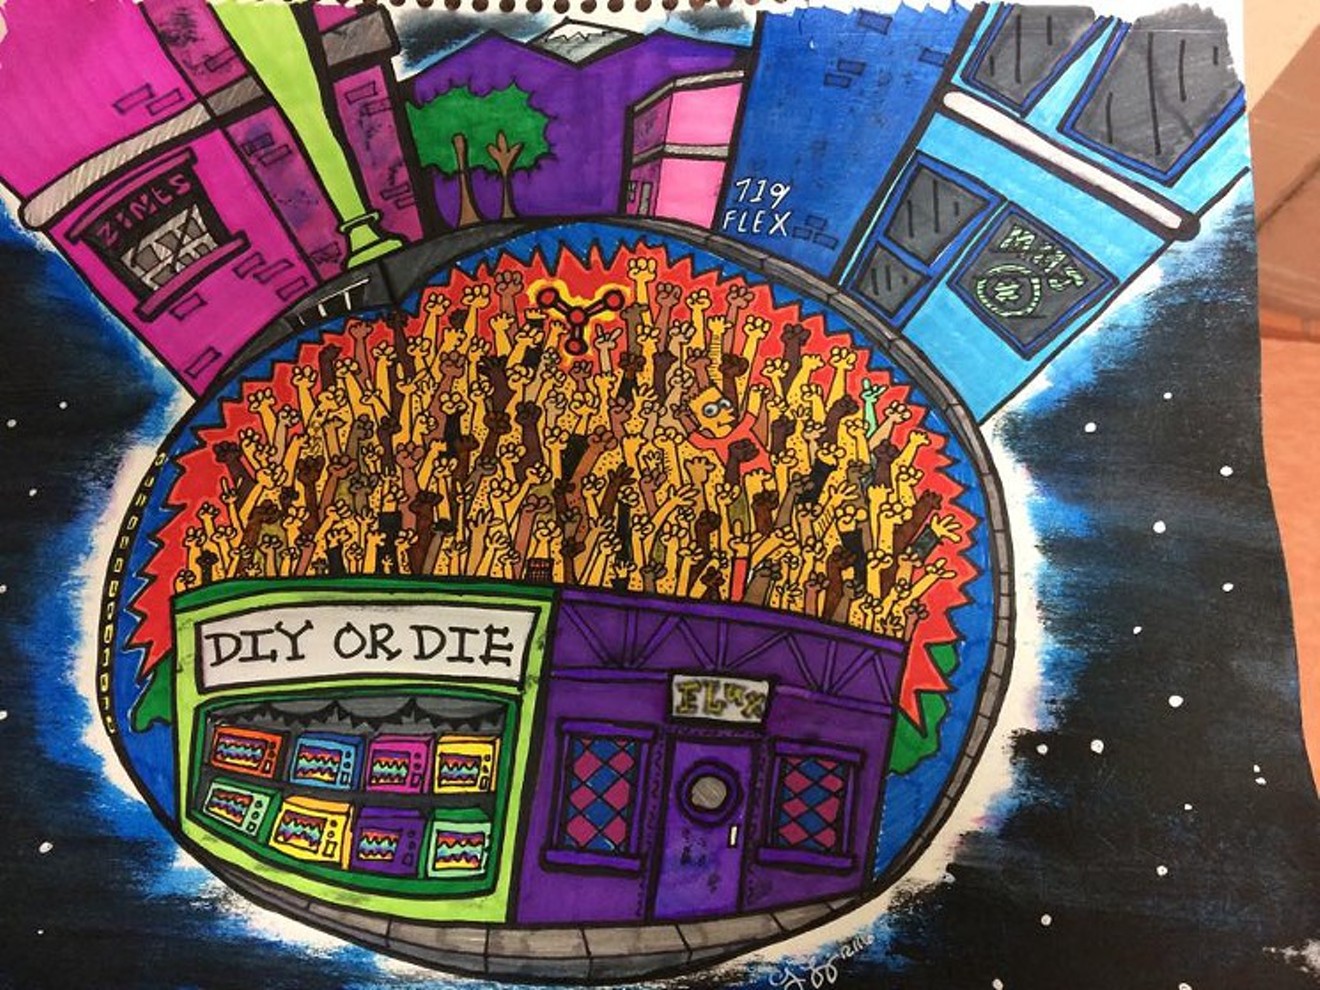 A mural posted to Flux Capacitor's Facebook page reads "DIY OR DIE."